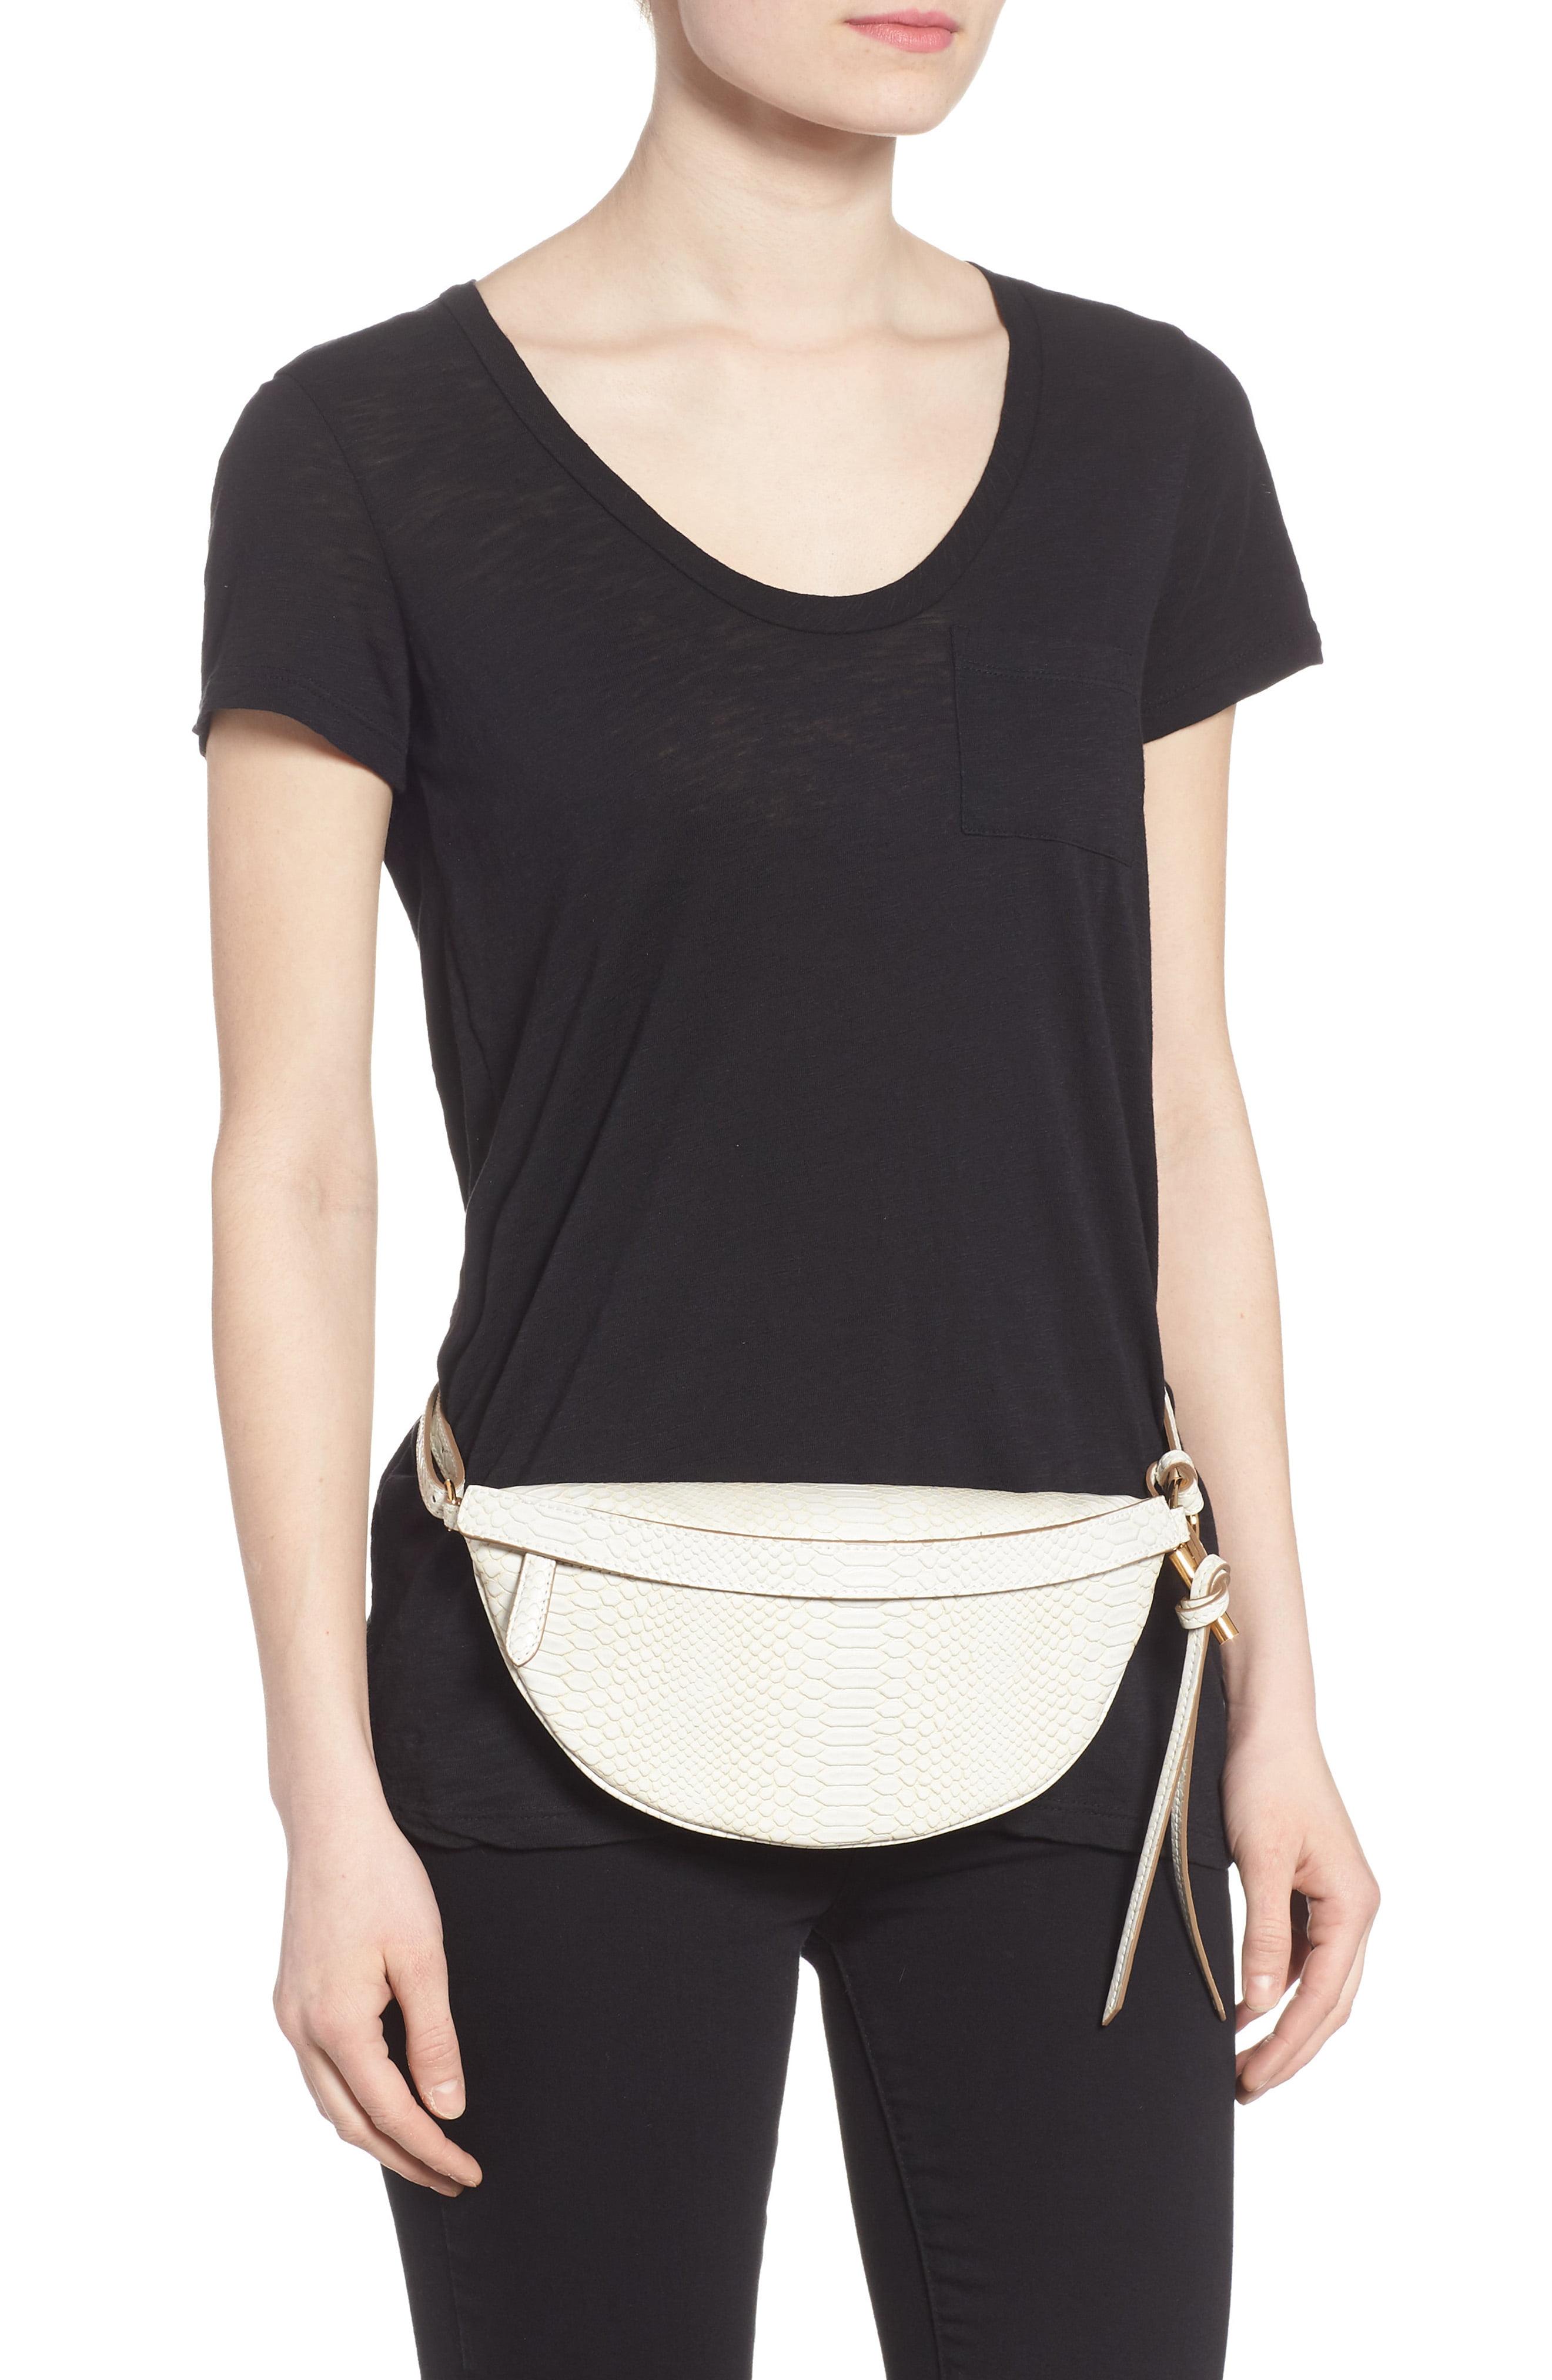 Stella McCartney Alter Snake Faux Leather Fanny Pack in White - Lyst